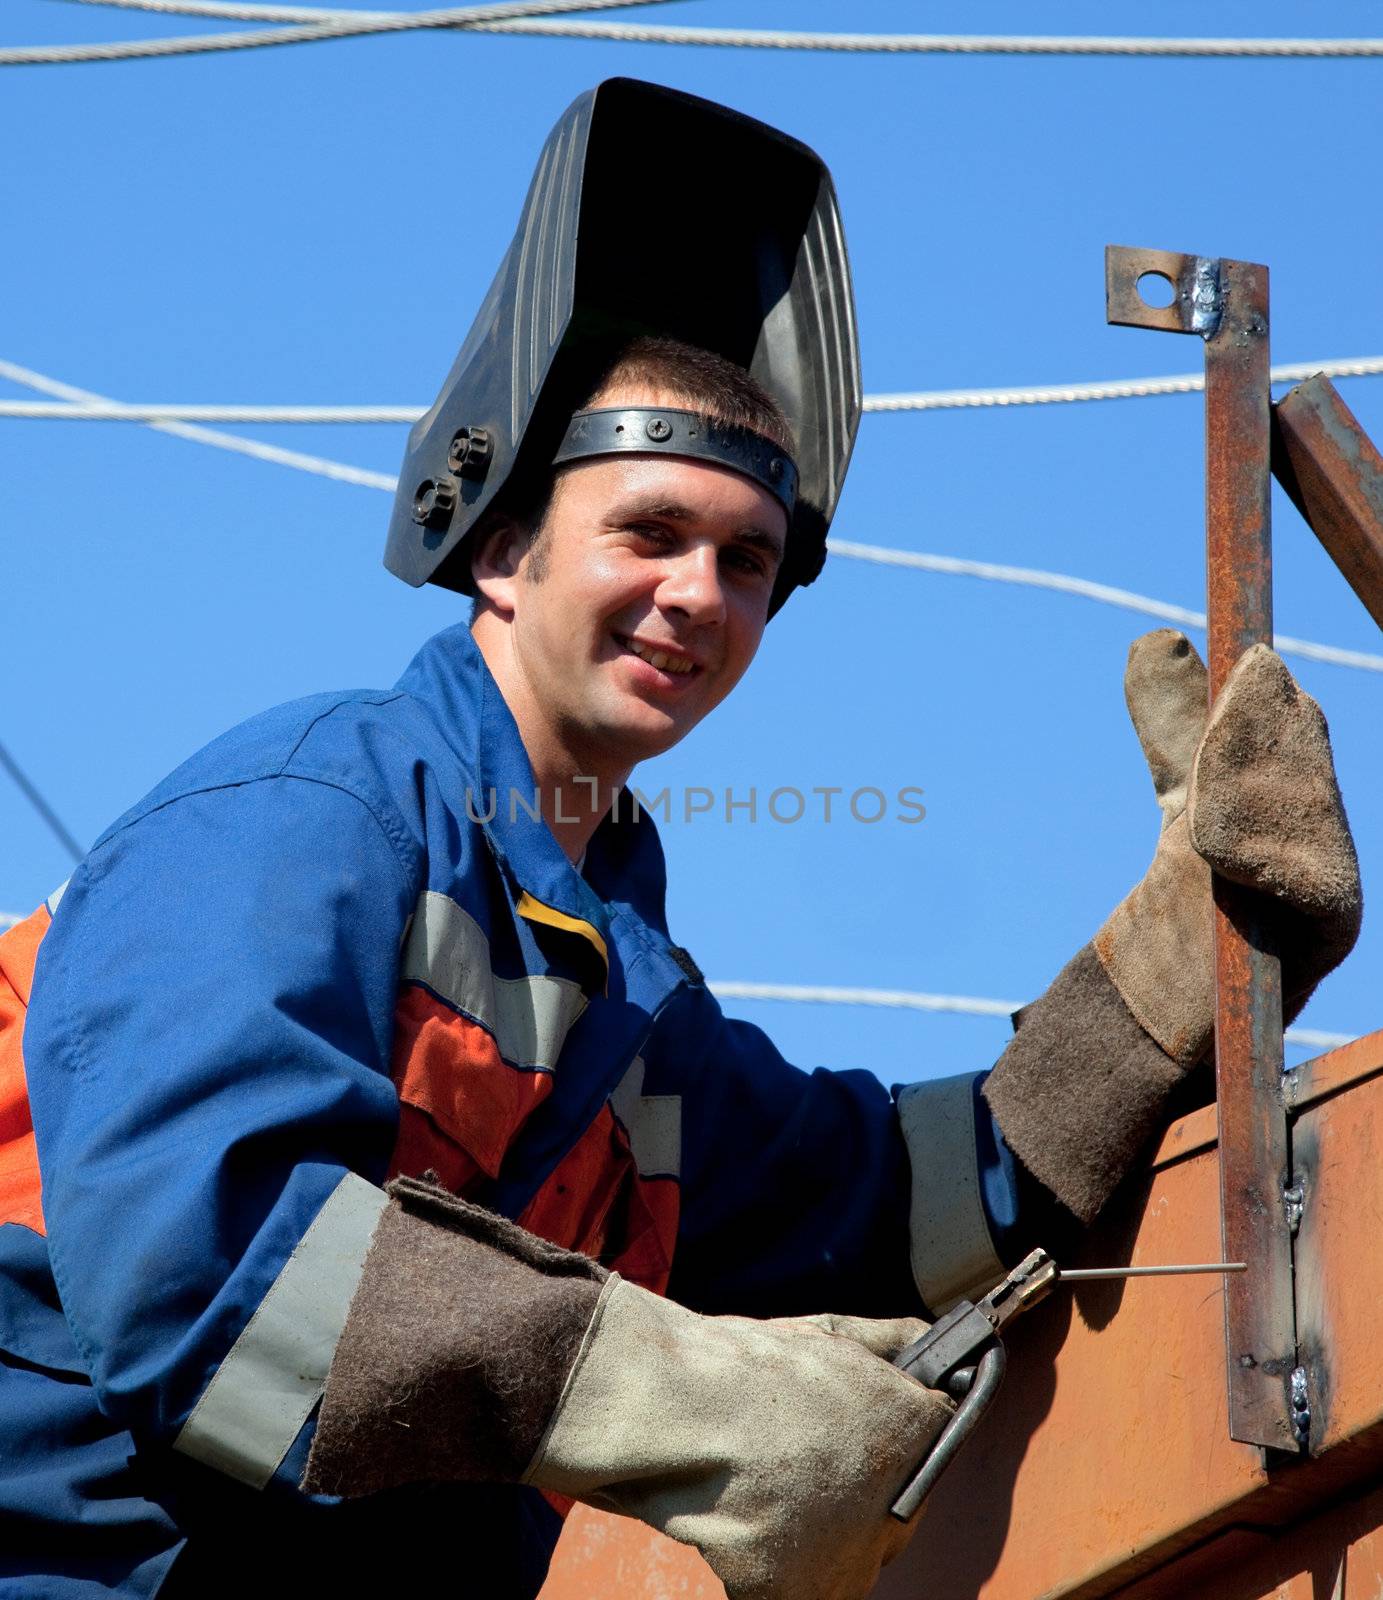 A welder working at height on a background of blue sky